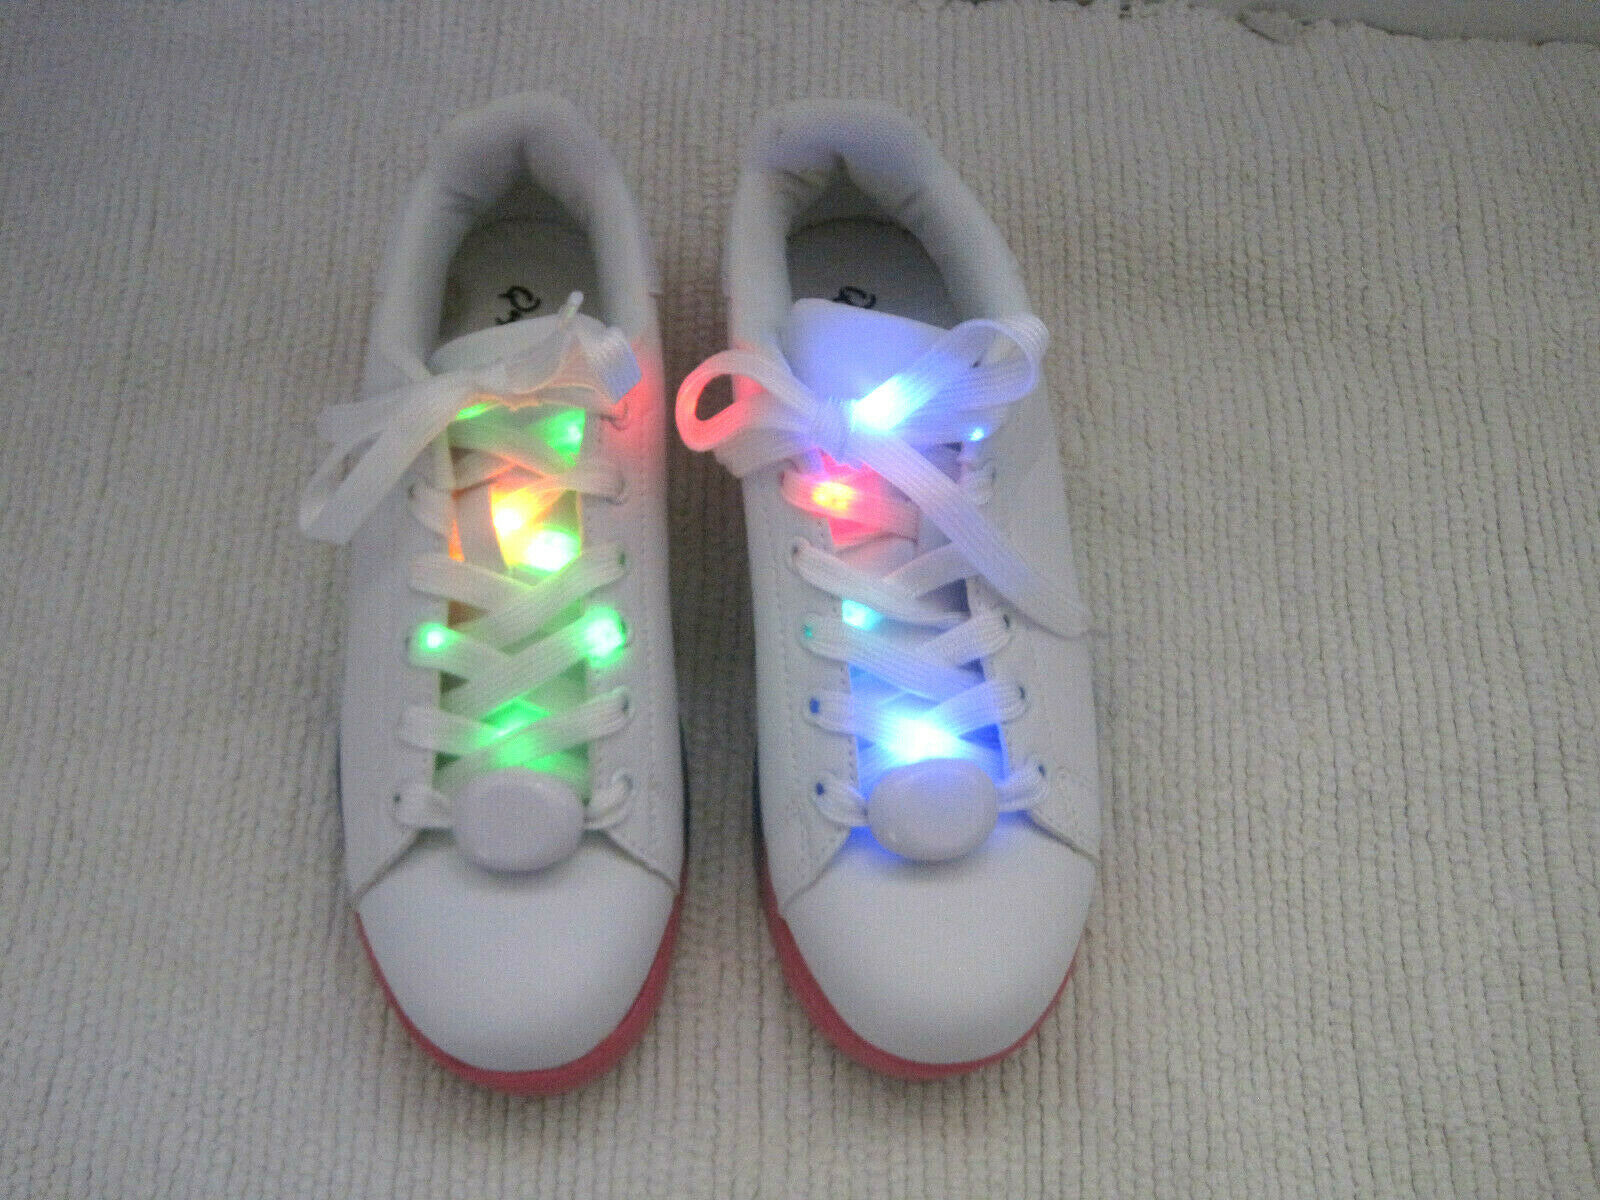 NWOB Women's QUPID Lighted Shoelaces Colorful Soles White Sneakers Shoes Size 7